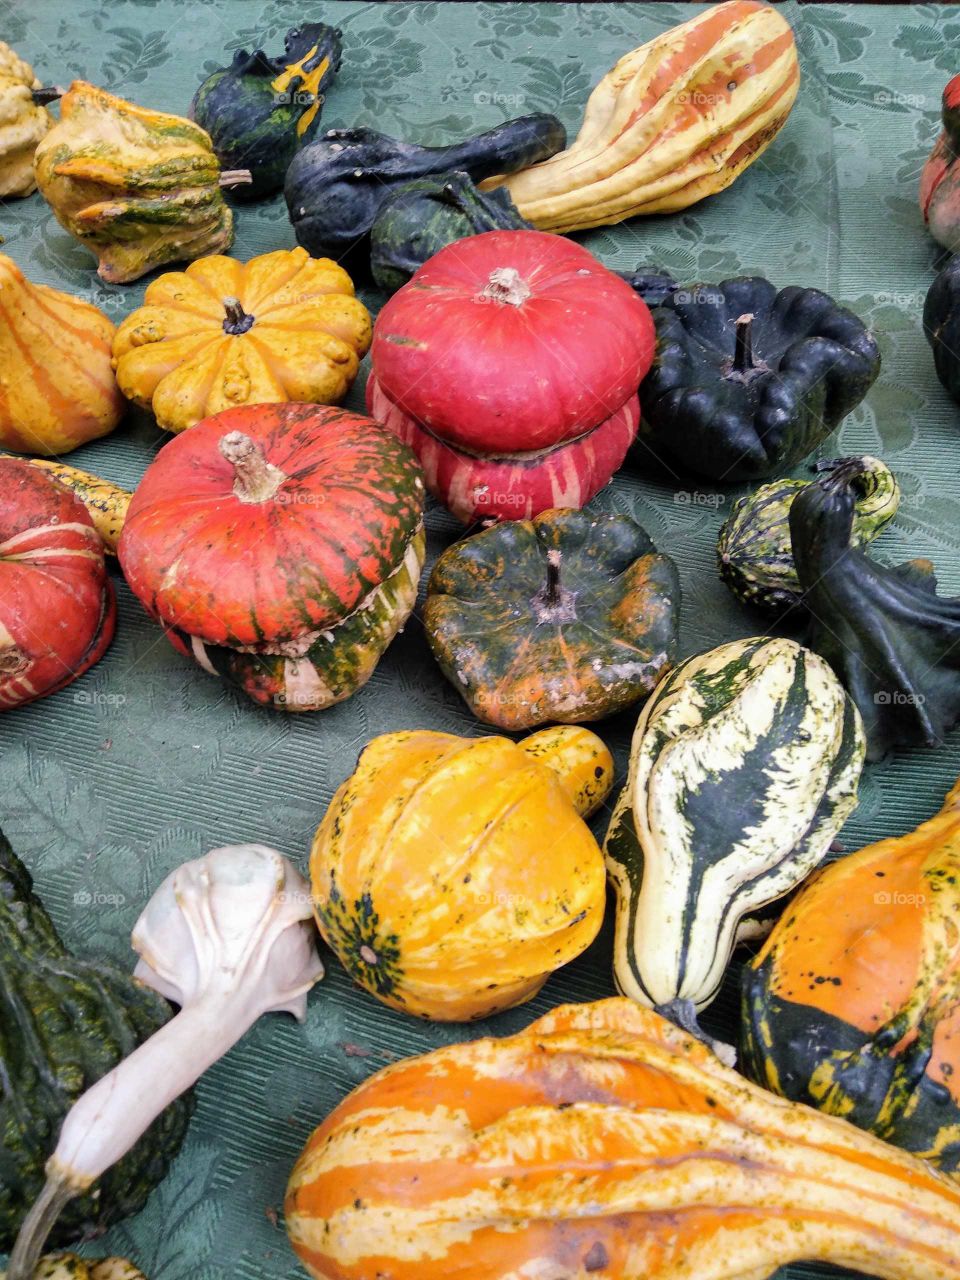 A group of colorful pumpkins in a fair market stall